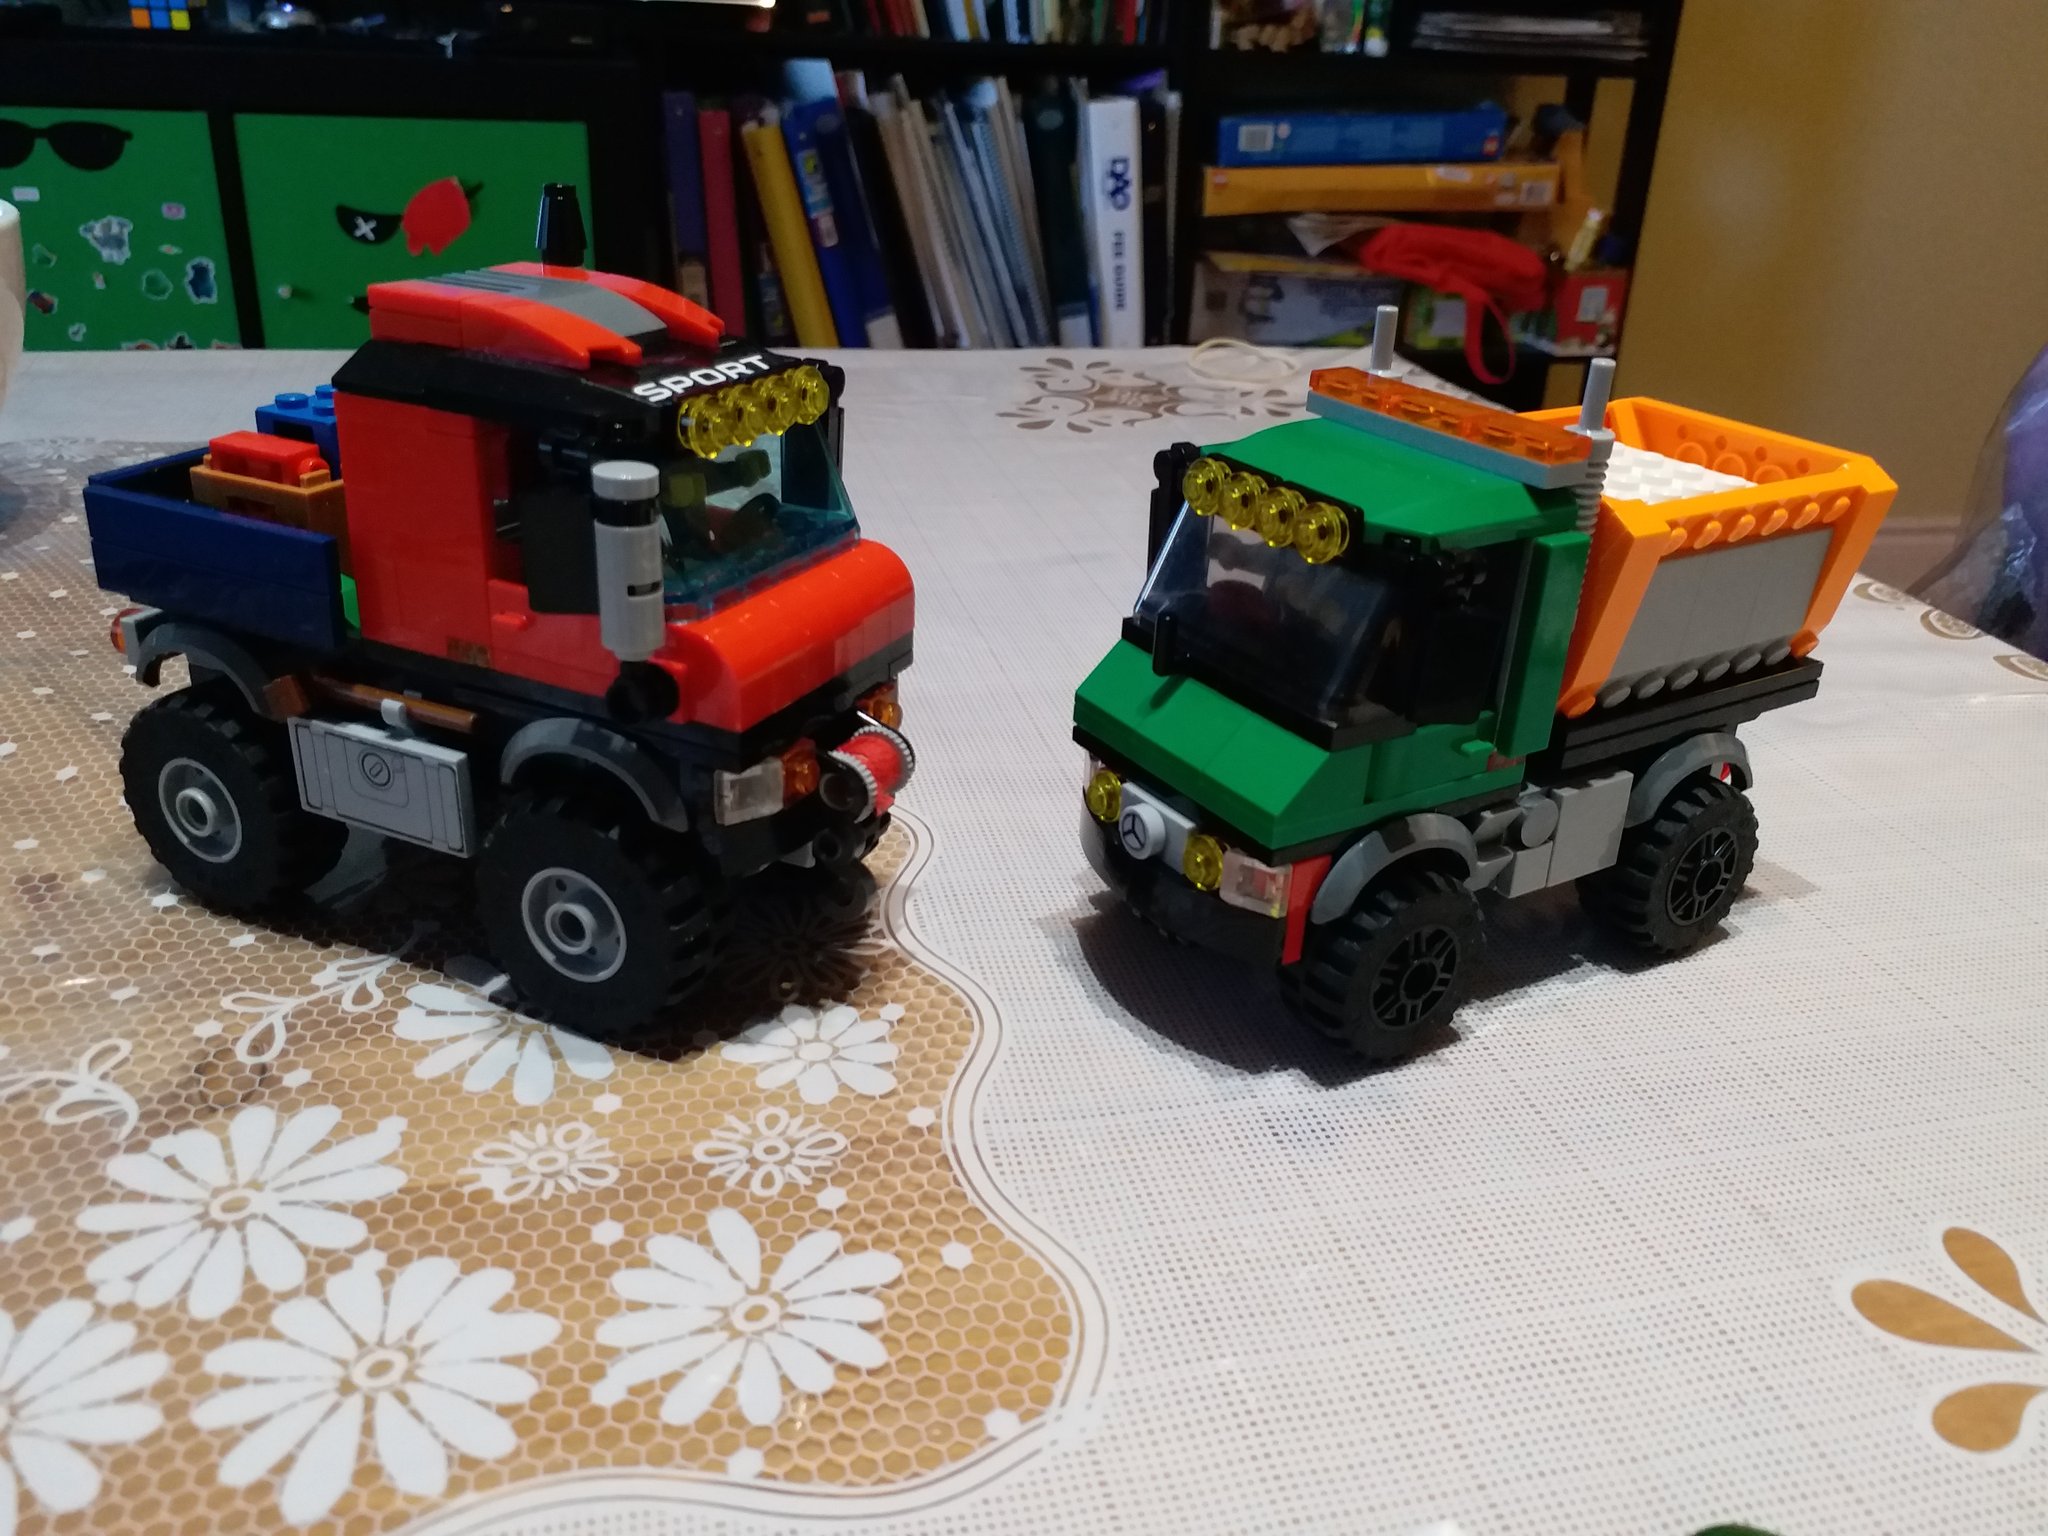 Gwai Fa Tin 貴花田 on Twitter: "Lego Unimog moc combination (1). Here are two  Unimog chassis to fit different driver cab and different carrying items.  One chassis is from set 60083 Snow